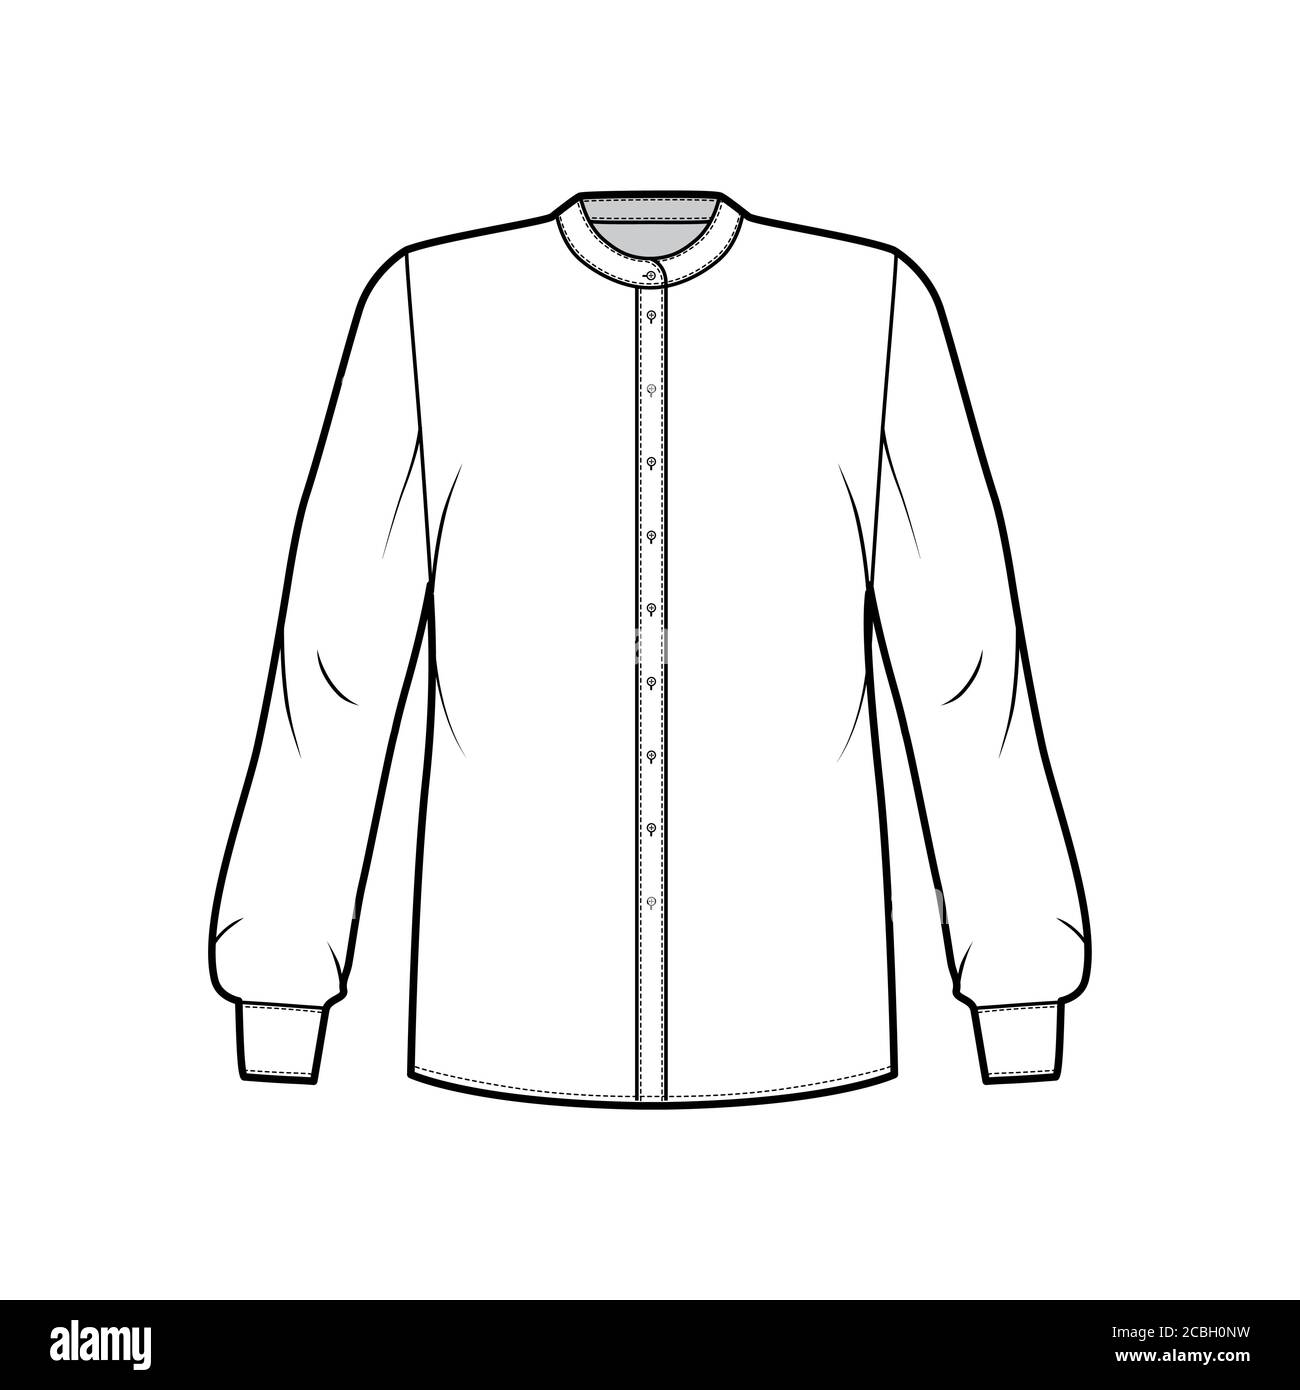 Shirt technical fashion illustration with rounded mandarin collar, long sleeves with cuff, oversized body, back round yoke. Flat apparel top template front, white color. Women men unisex blouse mockup Stock Vector